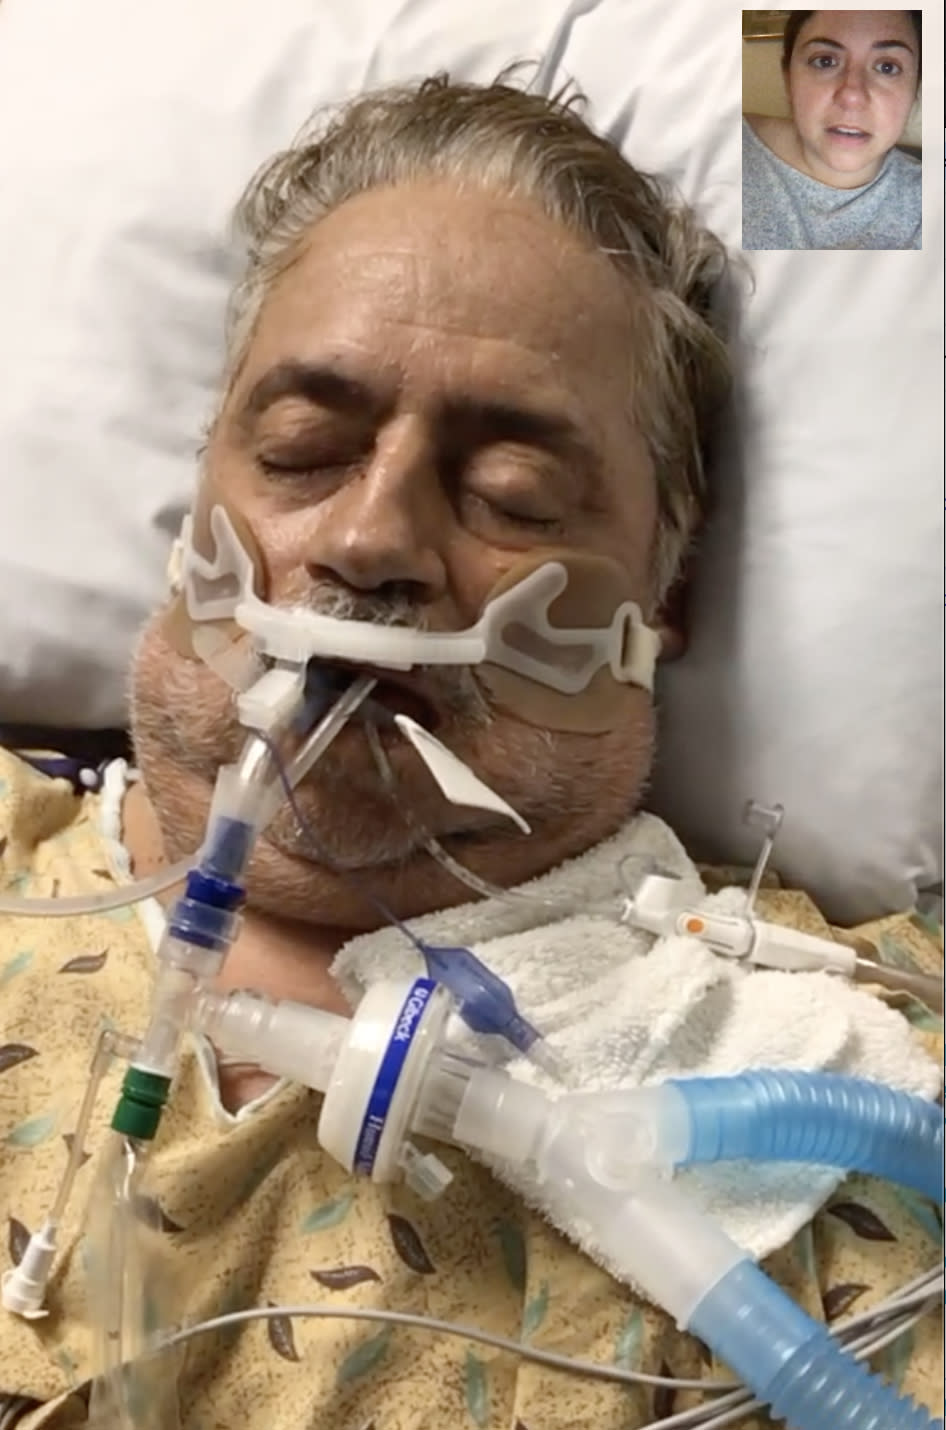 Mark was put on a ventilator until he passed away on June 30. (Courtesy Kristin Urquiza)